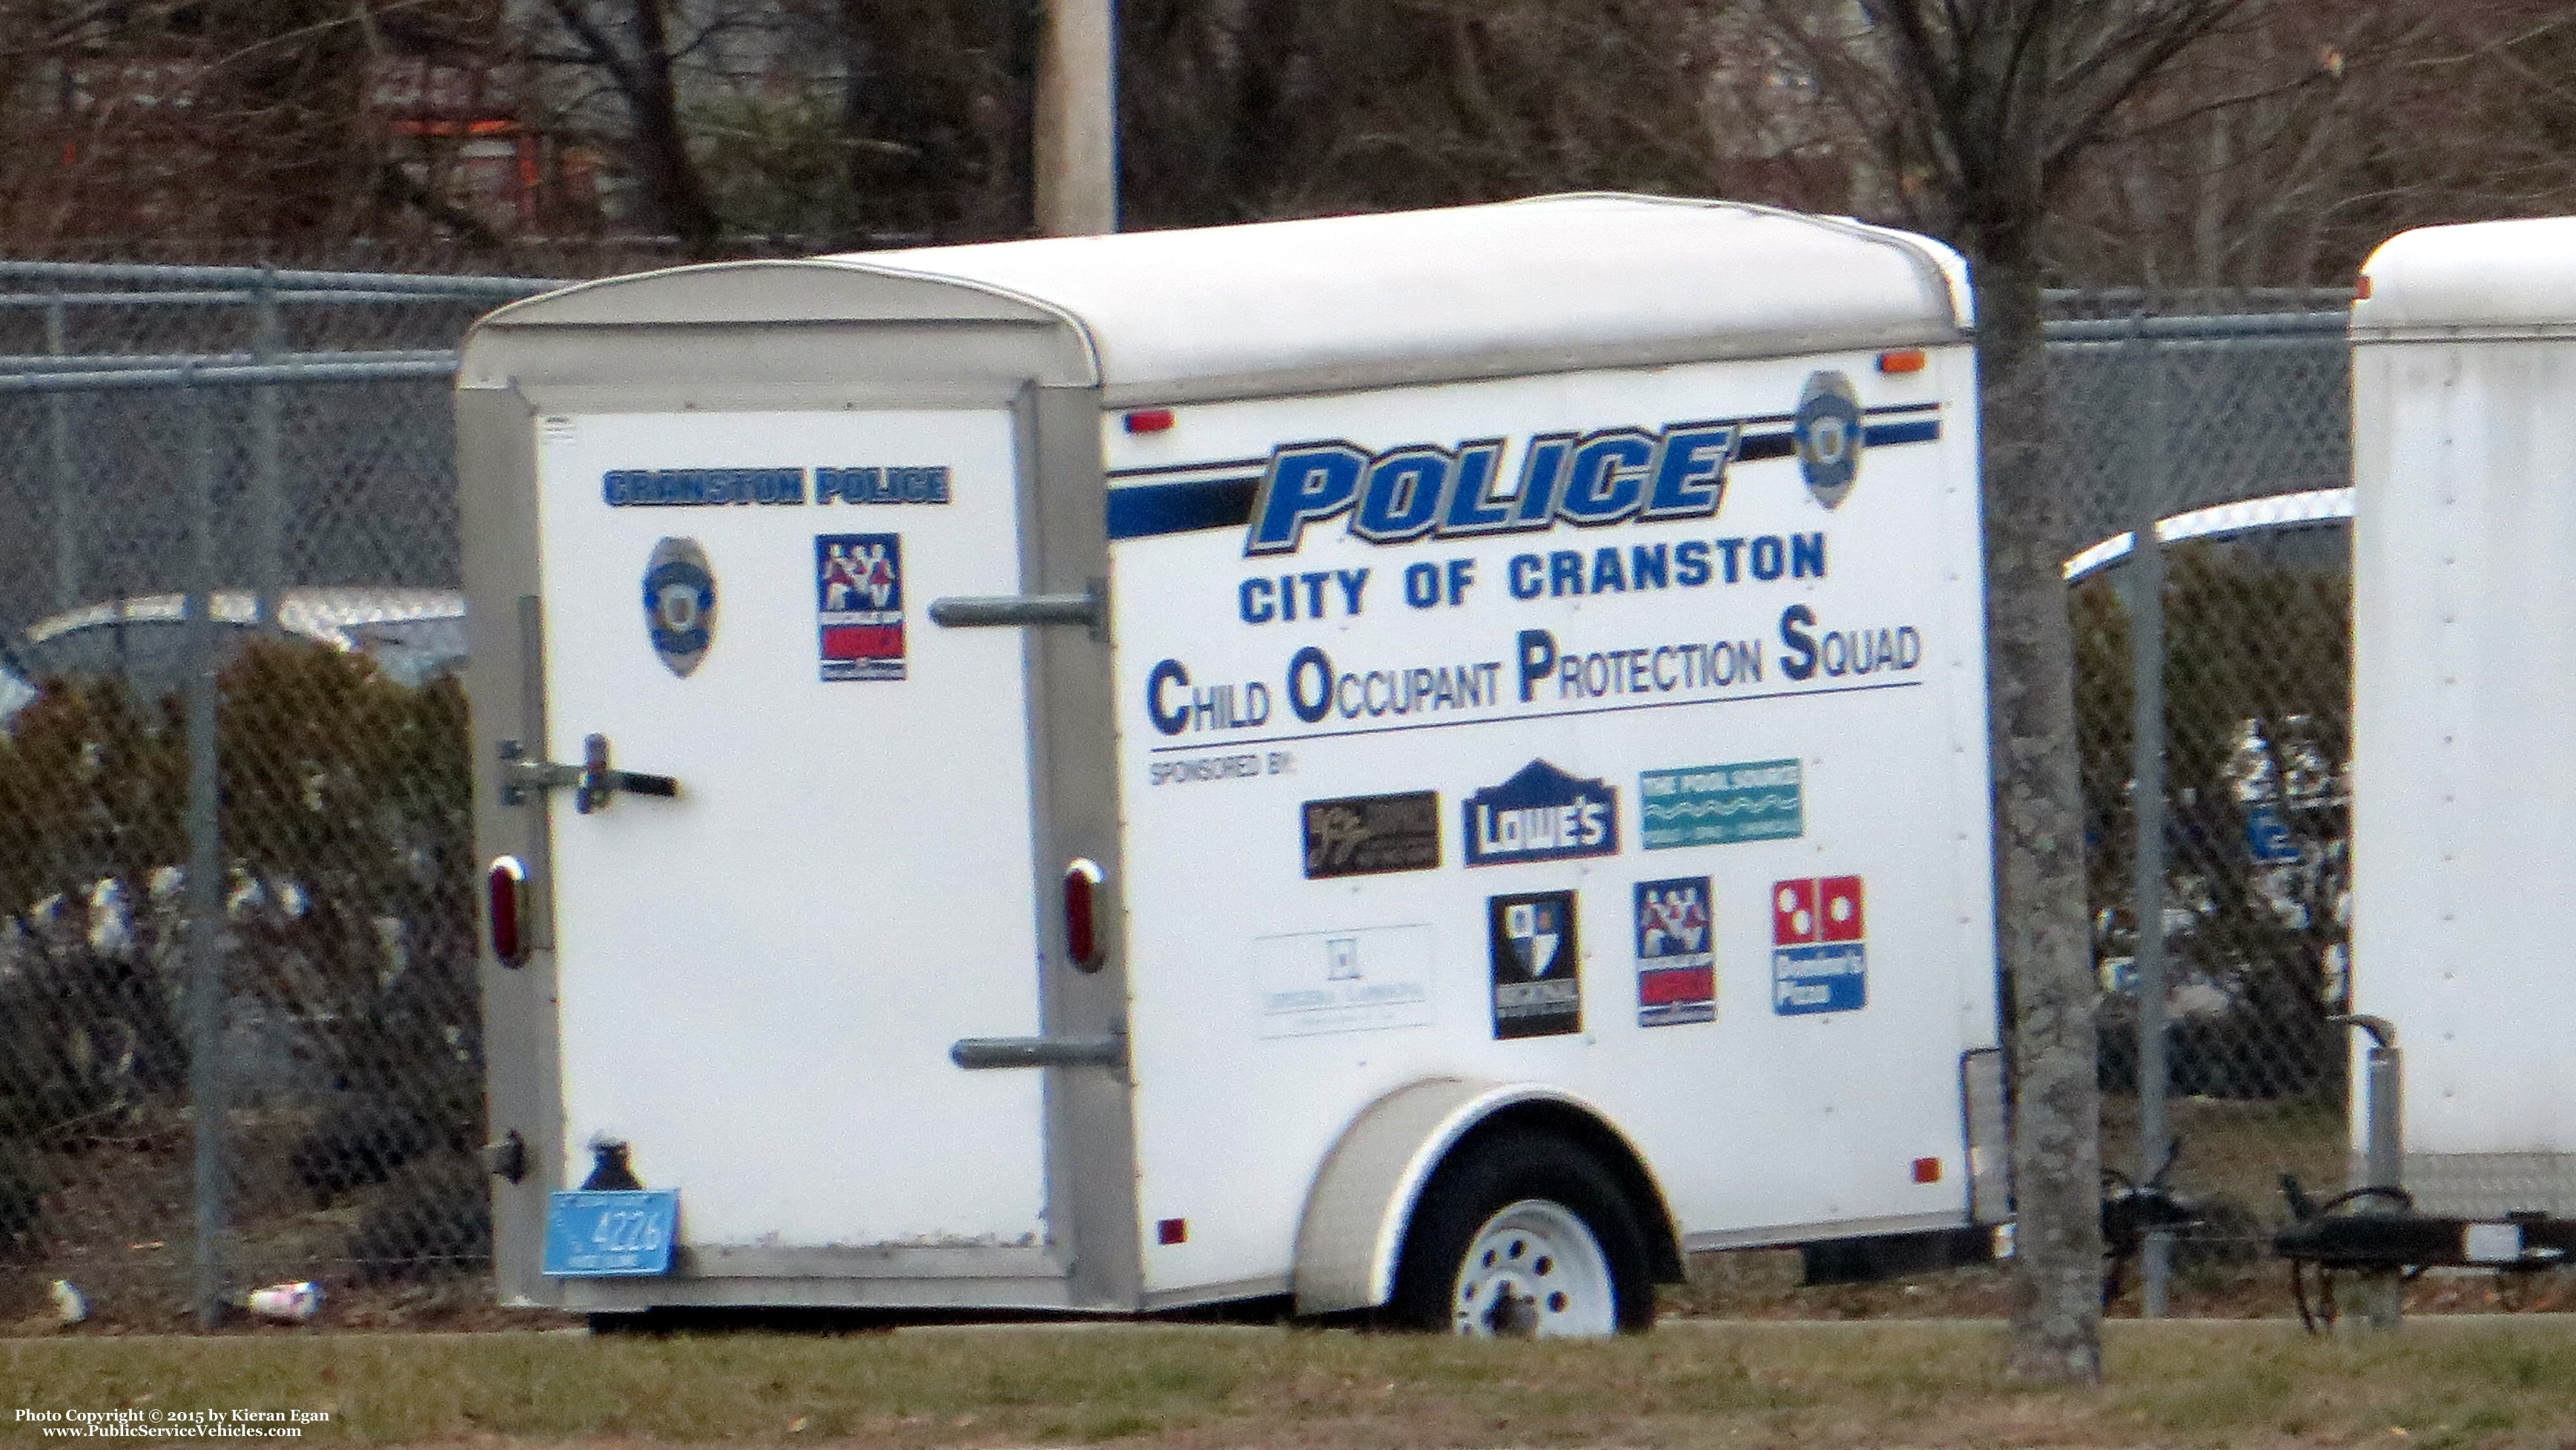 A photo  of Cranston Police
            Child Occupant Protection Squad Trailer, a 2000-2015 Trailer             taken by Kieran Egan